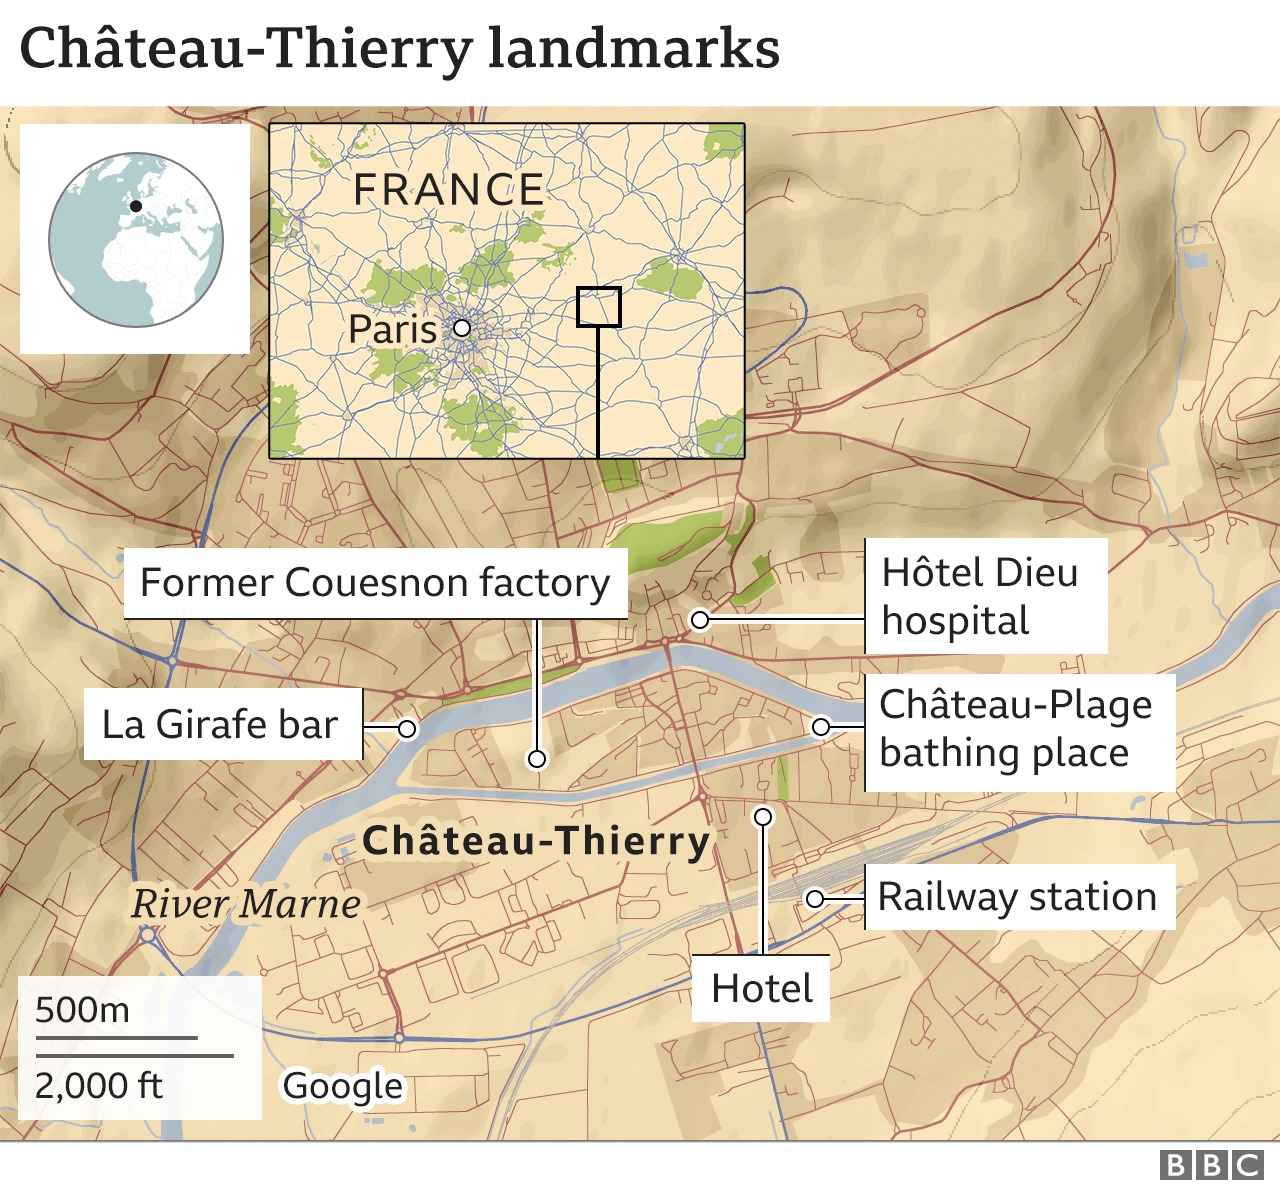 Landmarks in Chateau-Thierry